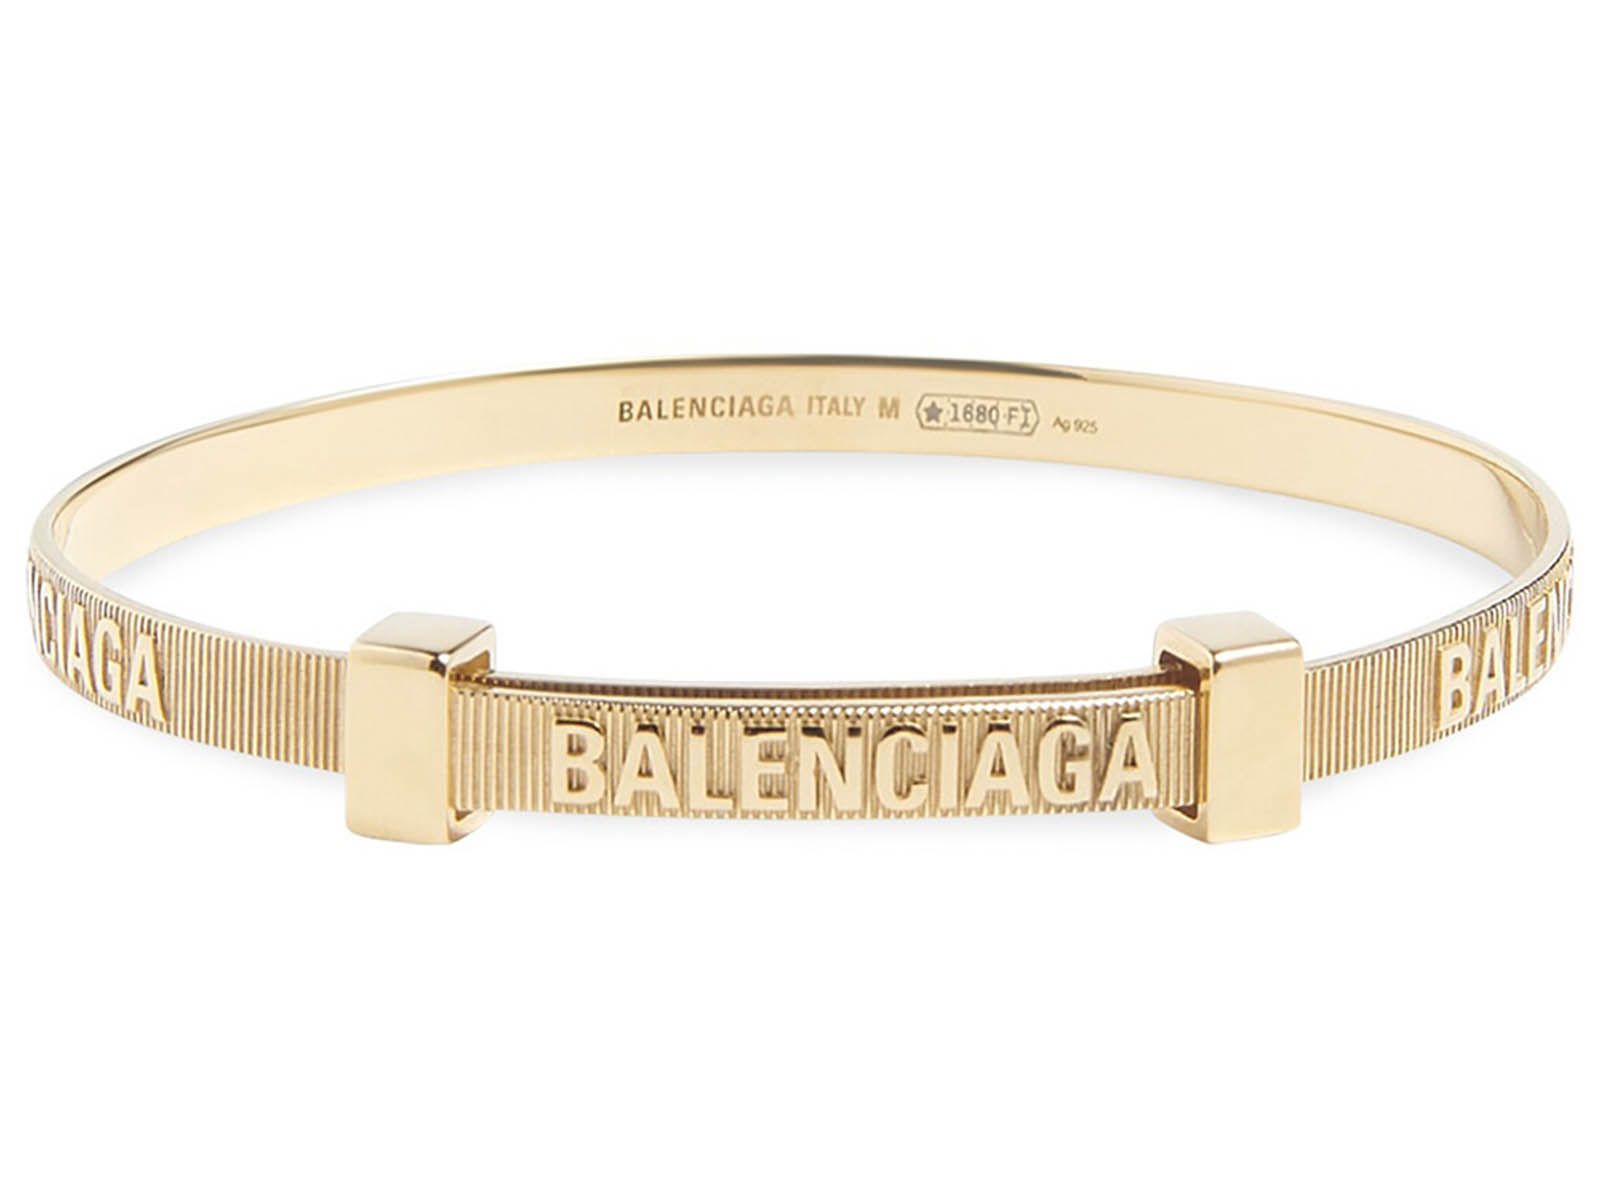 The Balenciaga bracelet is the must-have for Fall 22